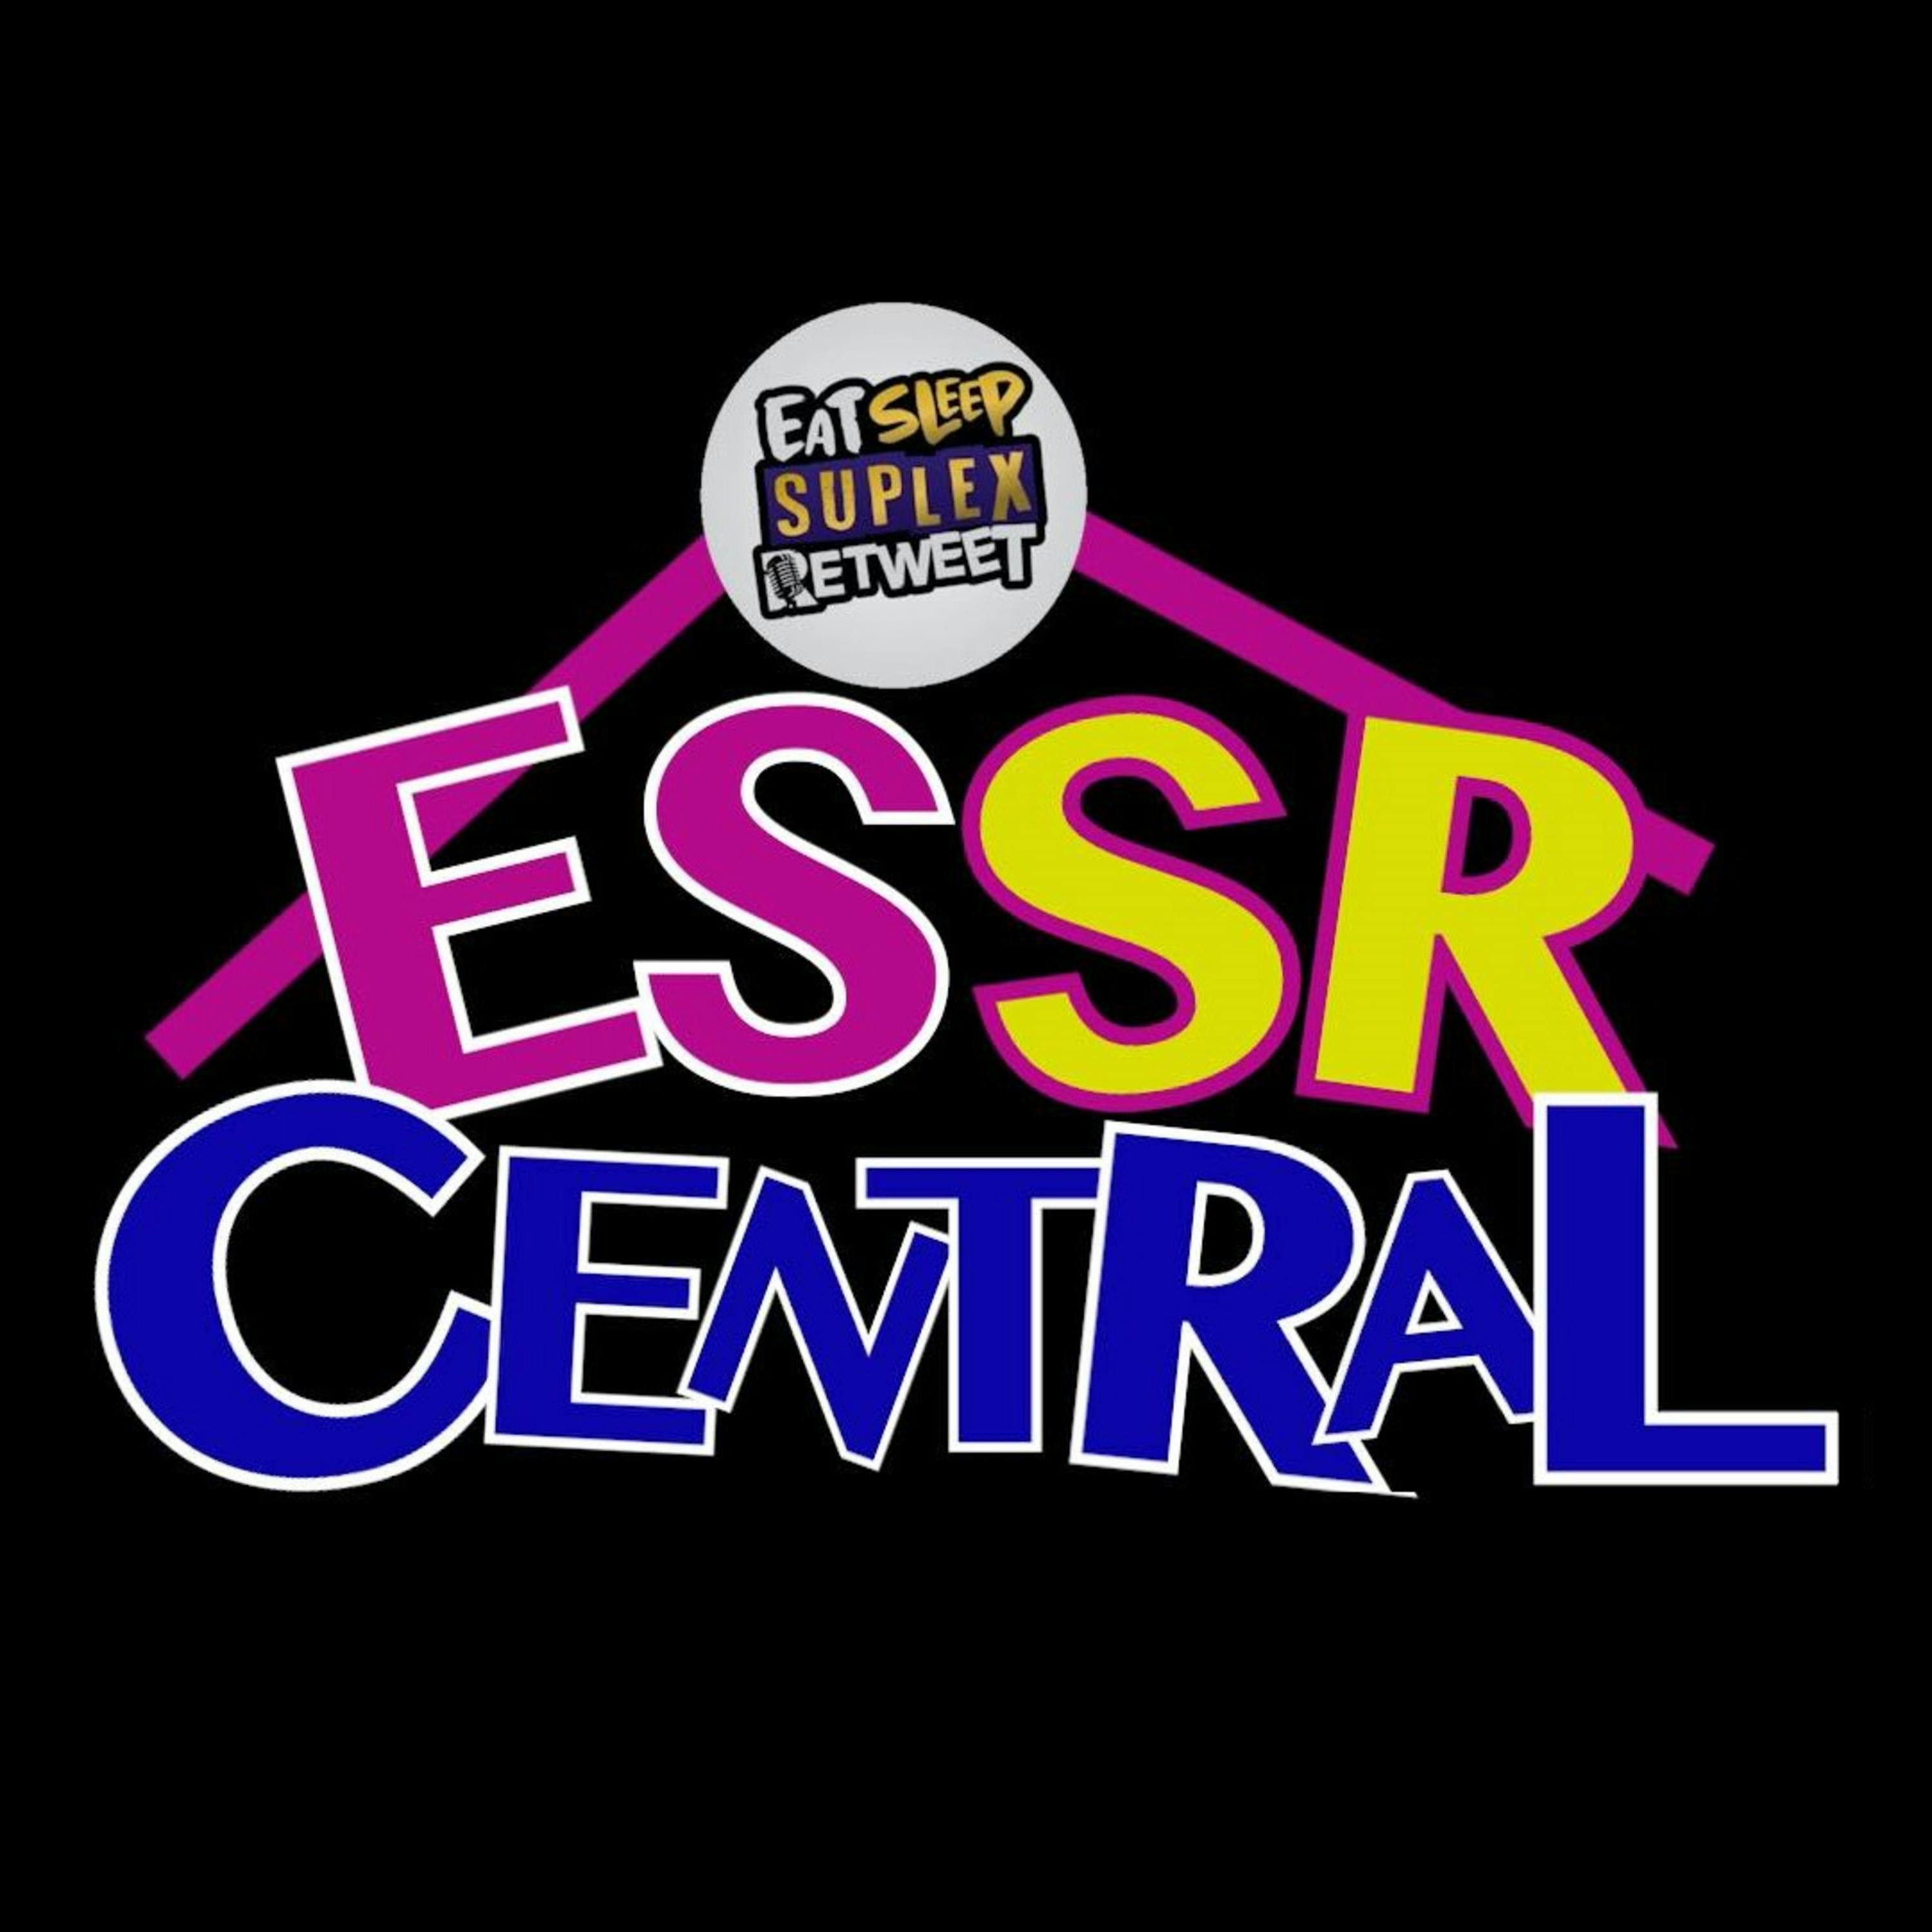 ESSR Central #026 - Hurt Business Booming, PC Recruitment, Worldwide Ratings and AEW Fan Awards